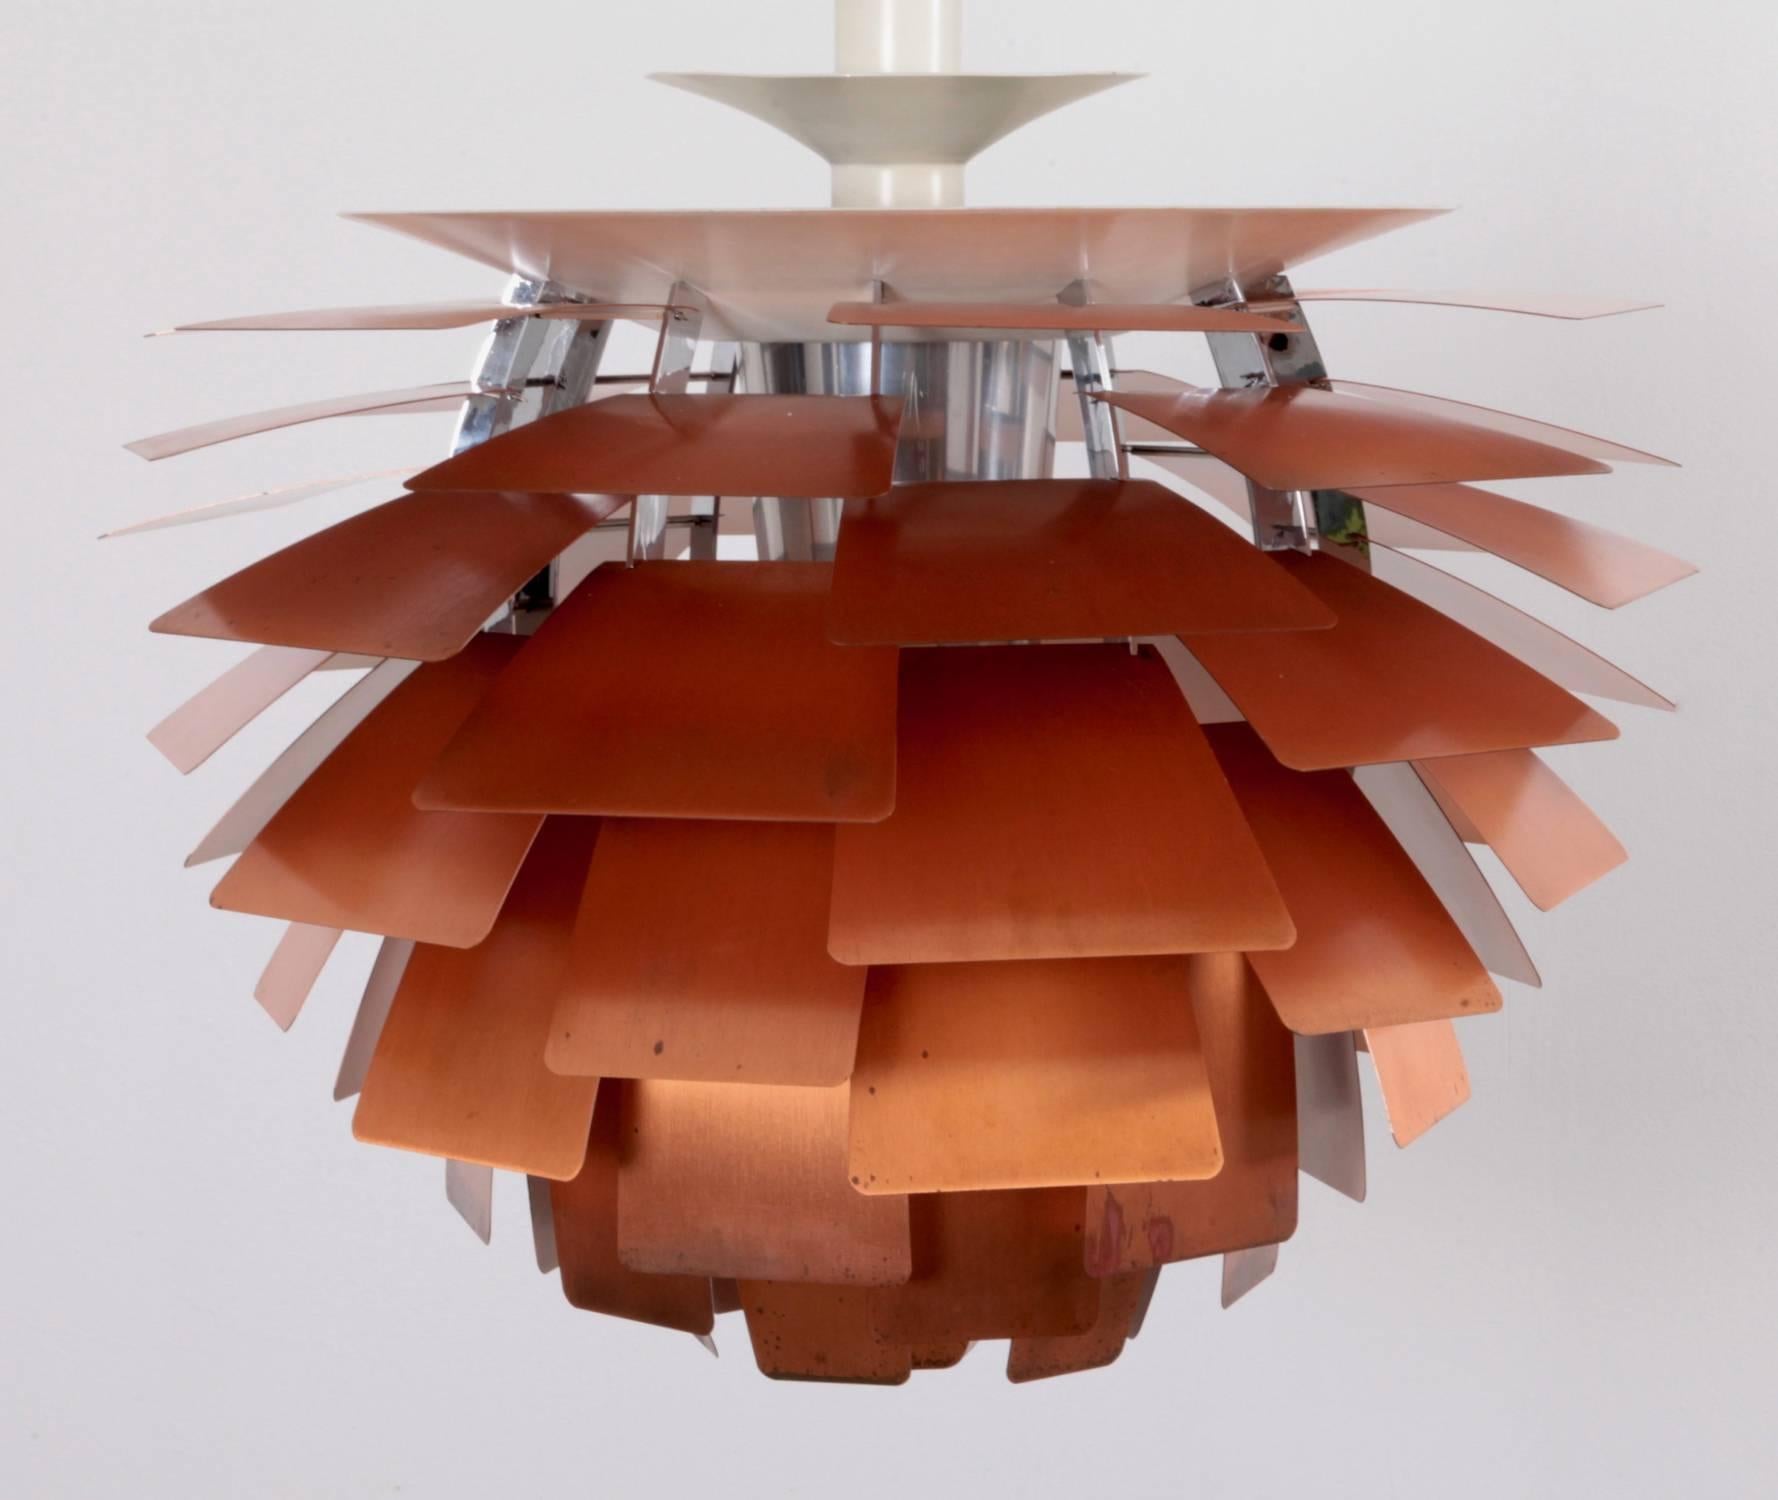 Iconic early brushed copper hanging pendant lamp by Poul Henningsen, manufactured by Louis Poulsen, Denmark. Outstanding authentic copper patina on the leaves. PH Artichoke (1958) is a 360-degree glare free Luminaire with copper leaves. One x E40